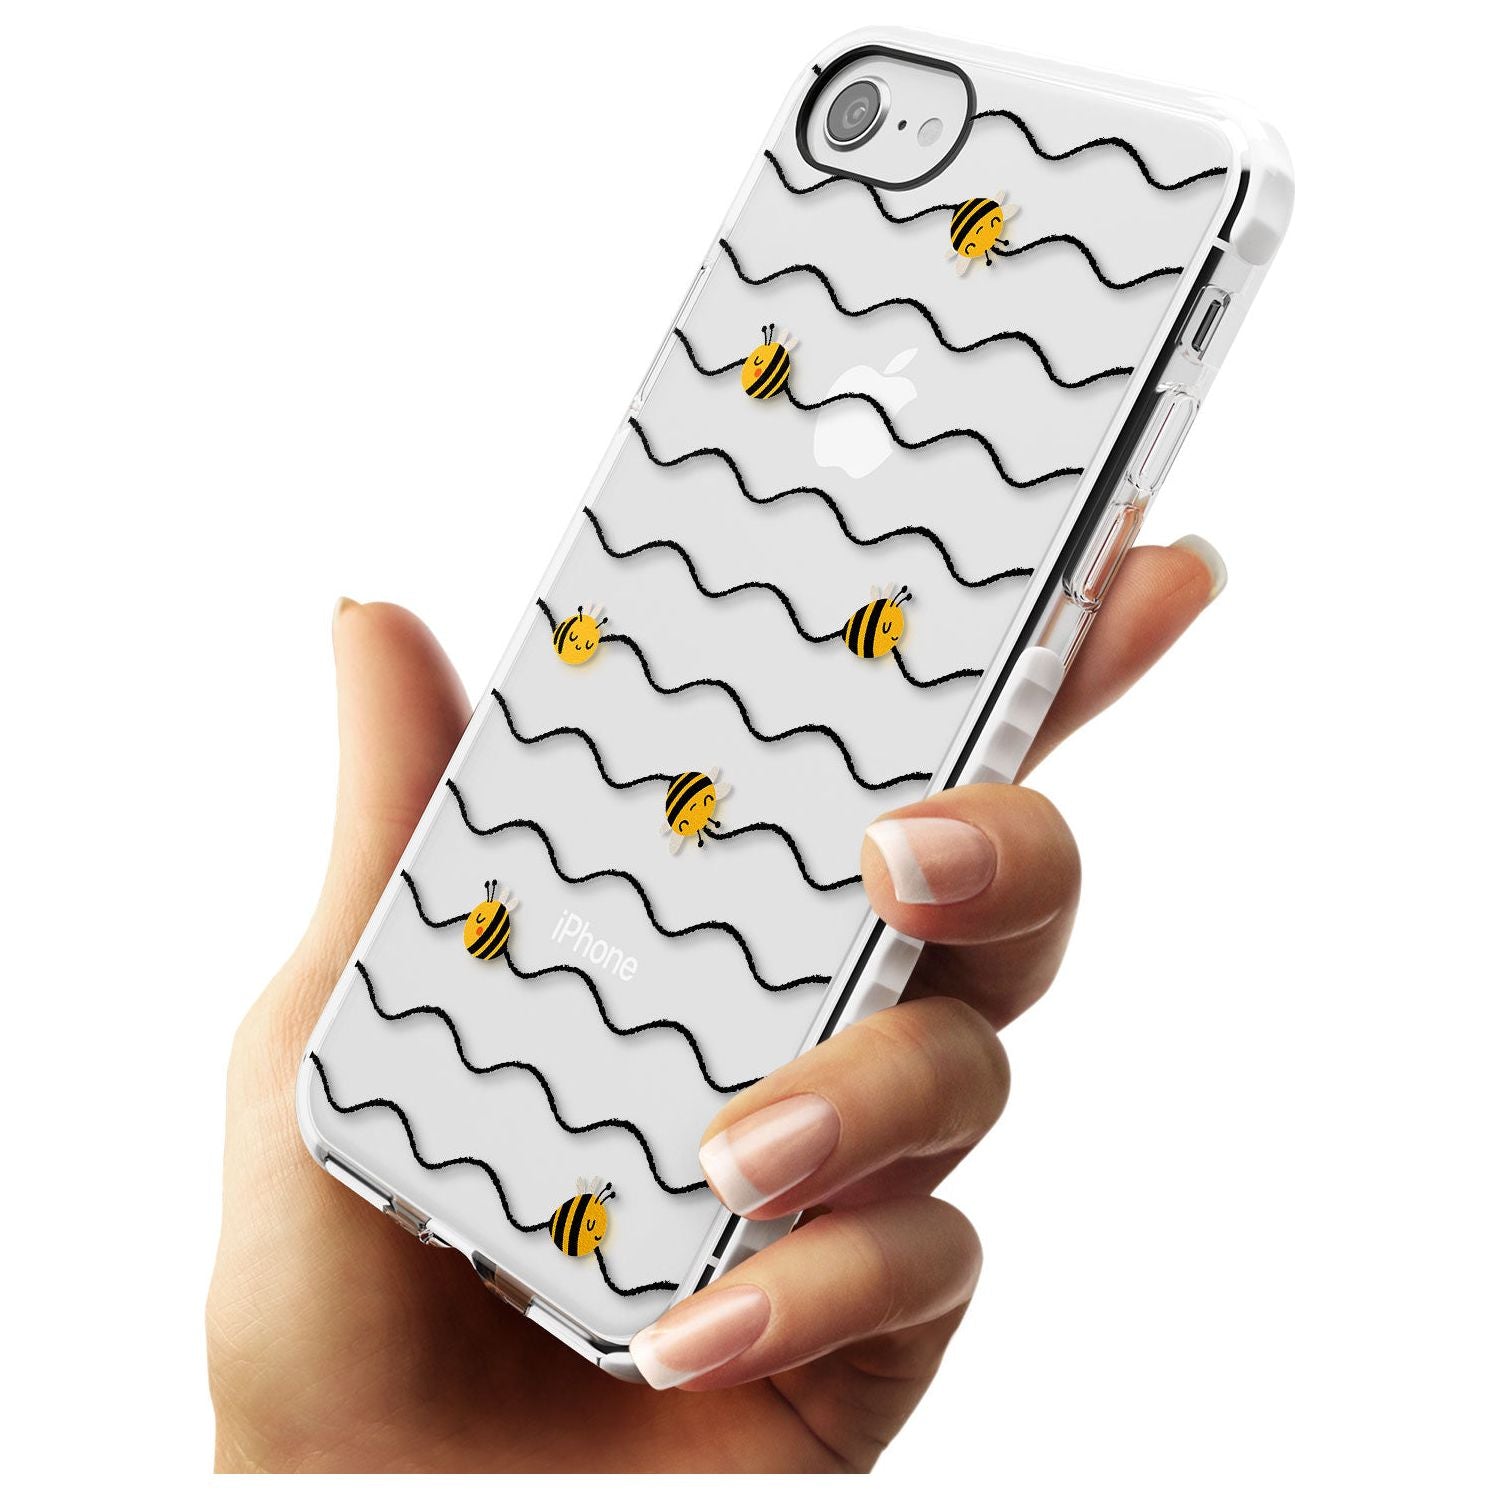 Sweet as Honey Patterns: Bees & Stripes (Clear) Impact Phone Case for iPhone SE 8 7 Plus